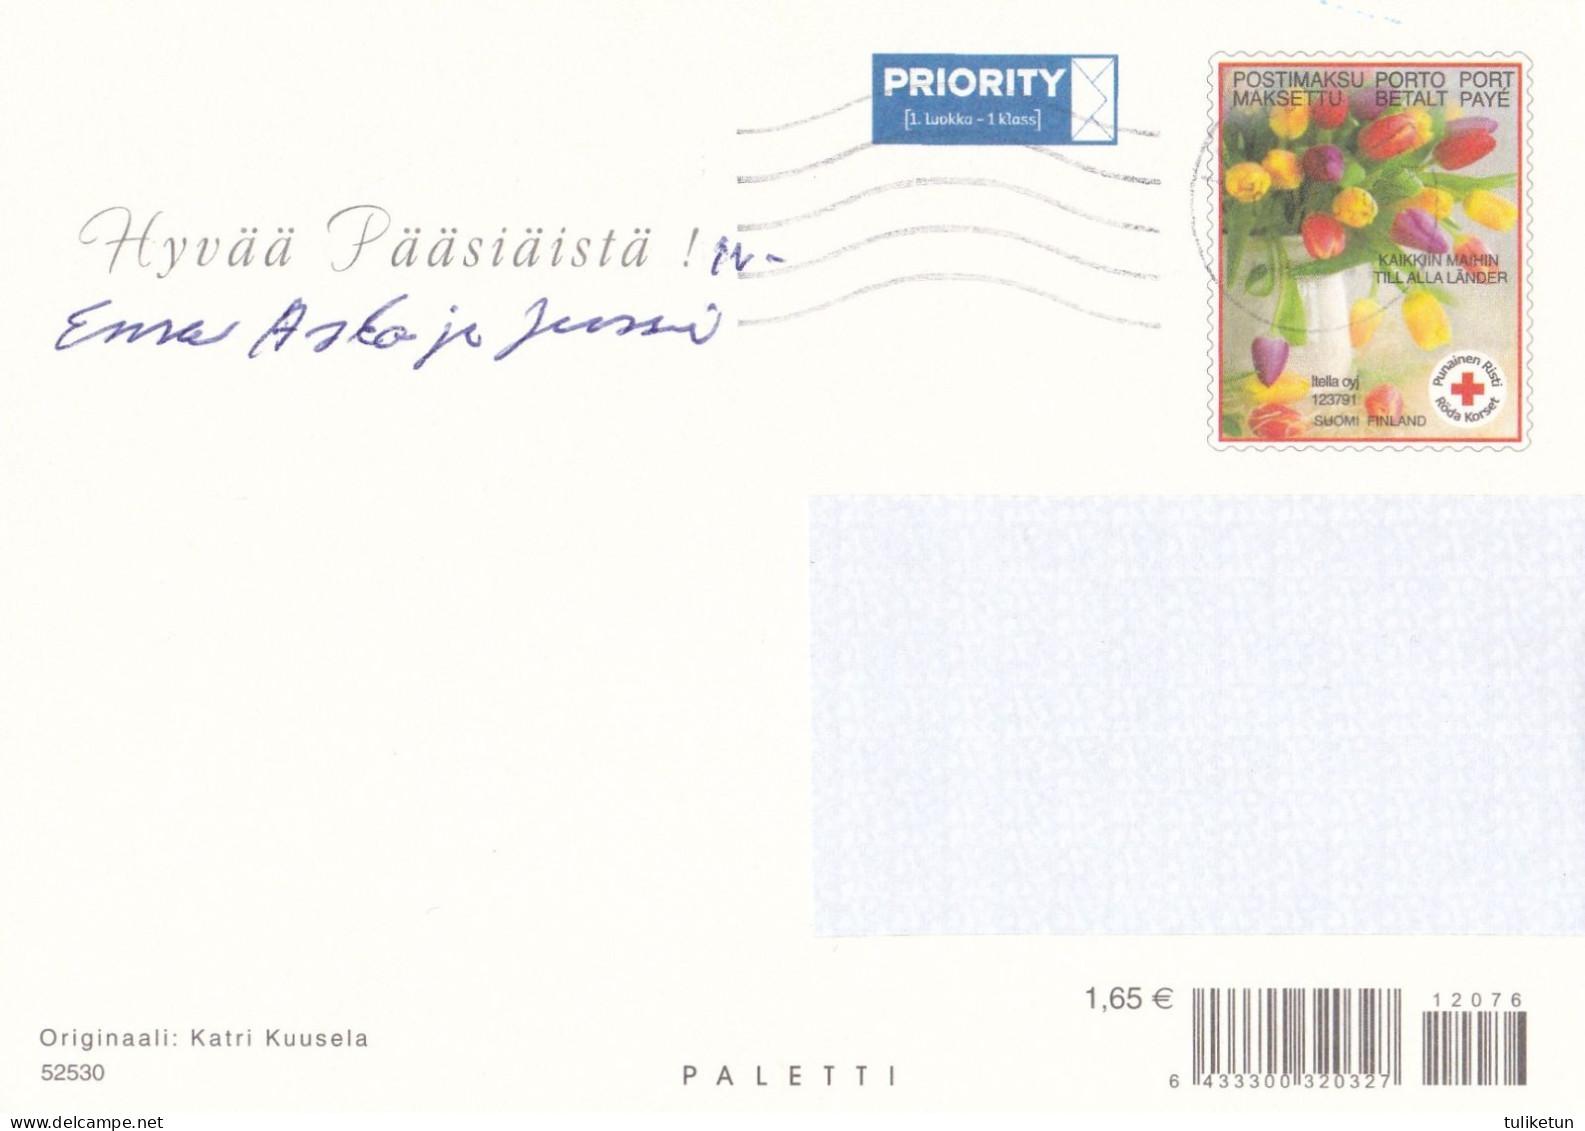 Postal Stationery - Bunny Holding Basket Full Of Eggs - Flowers - Chick - Red Cross - Suomi Finland - Postage Paid - Postal Stationery